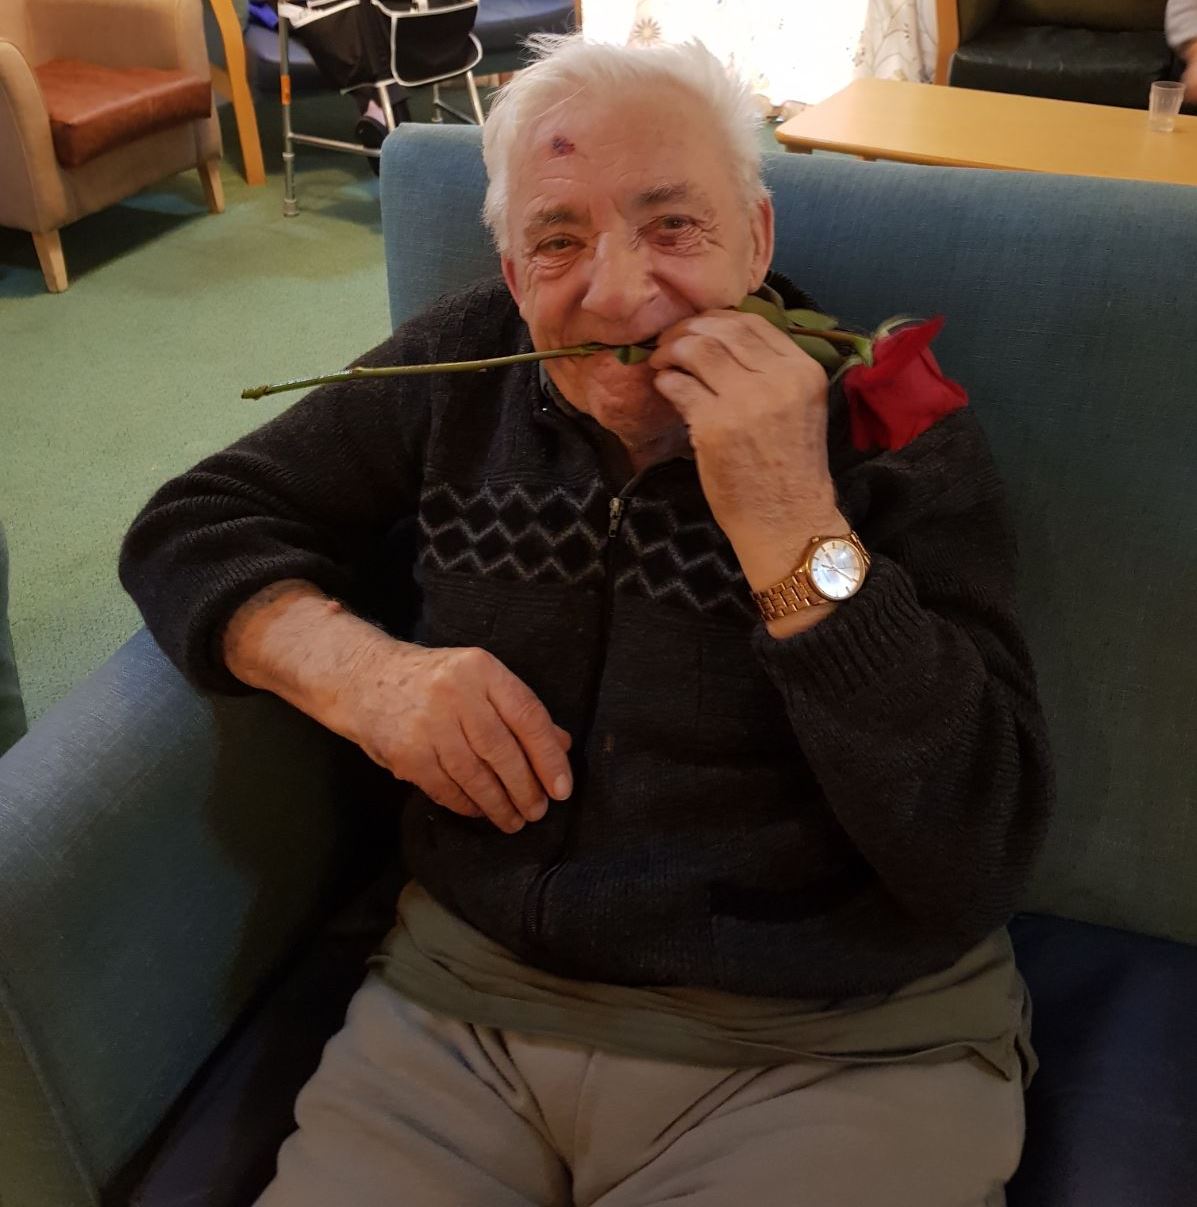 Valentines at Four Seasons Care Centre: Key Healthcare is dedicated to caring for elderly residents in safe. We have multiple dementia care homes including our care home middlesbrough, our care home St. Helen and care home saltburn. We excel in monitoring and improving care levels.